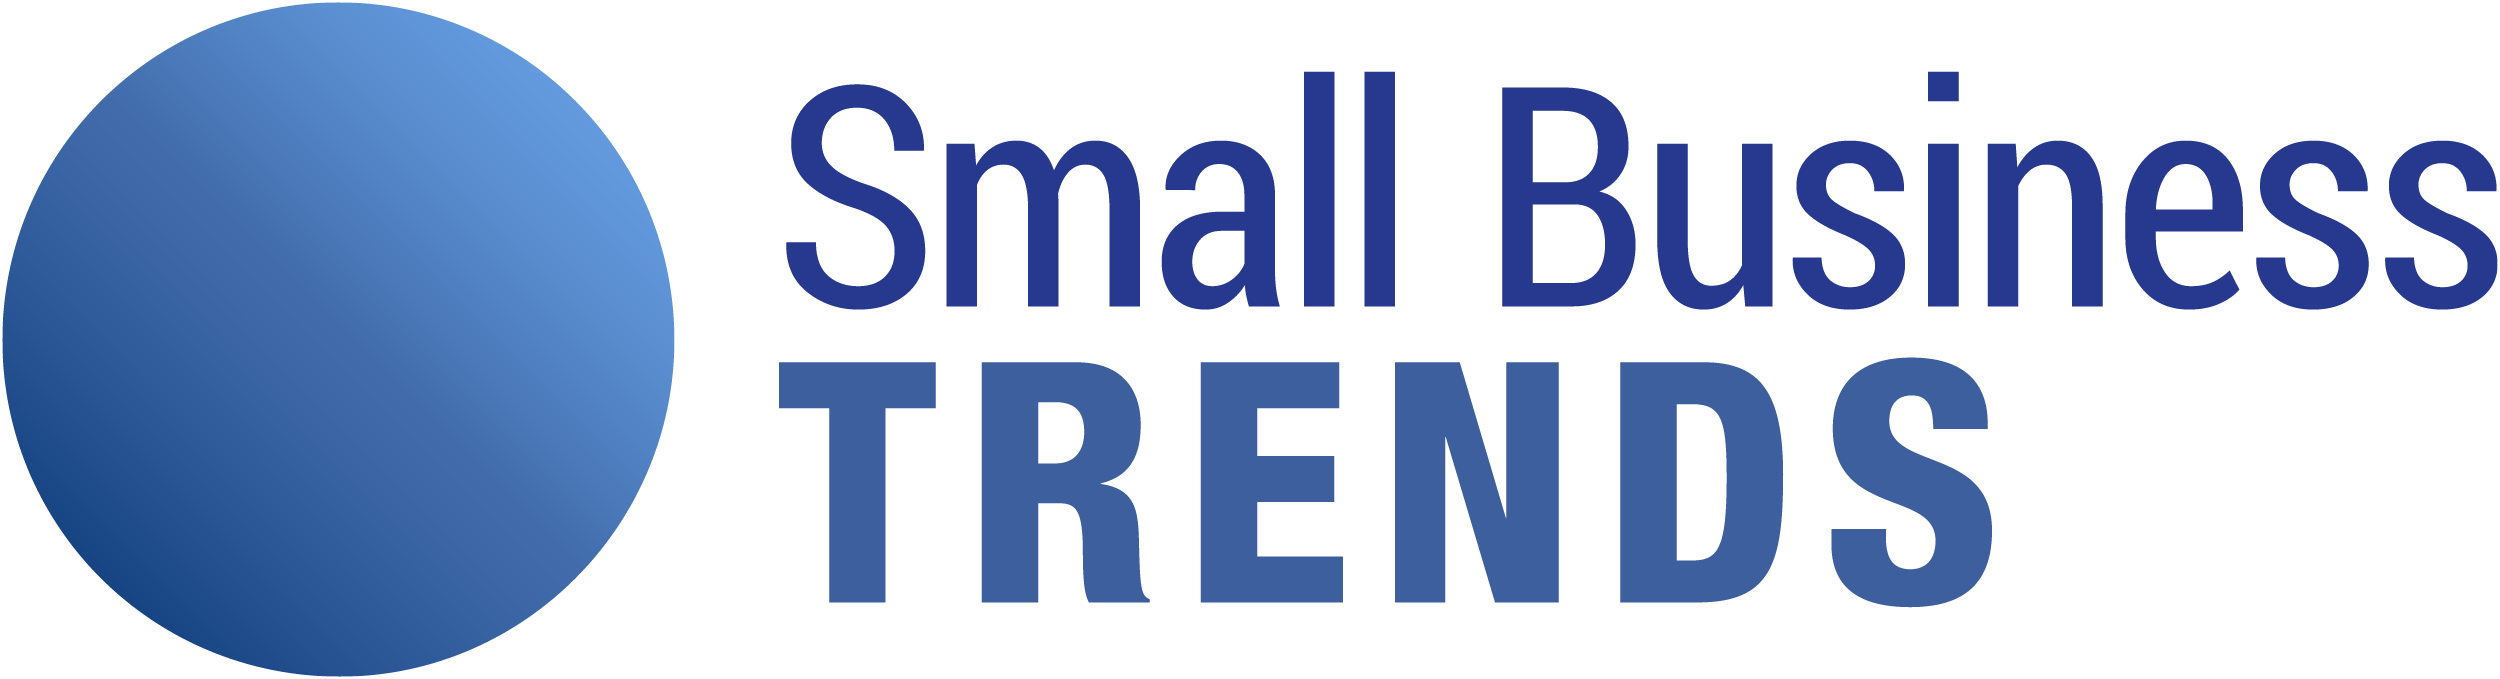 Small-Business-Trends-logo-2500w.png